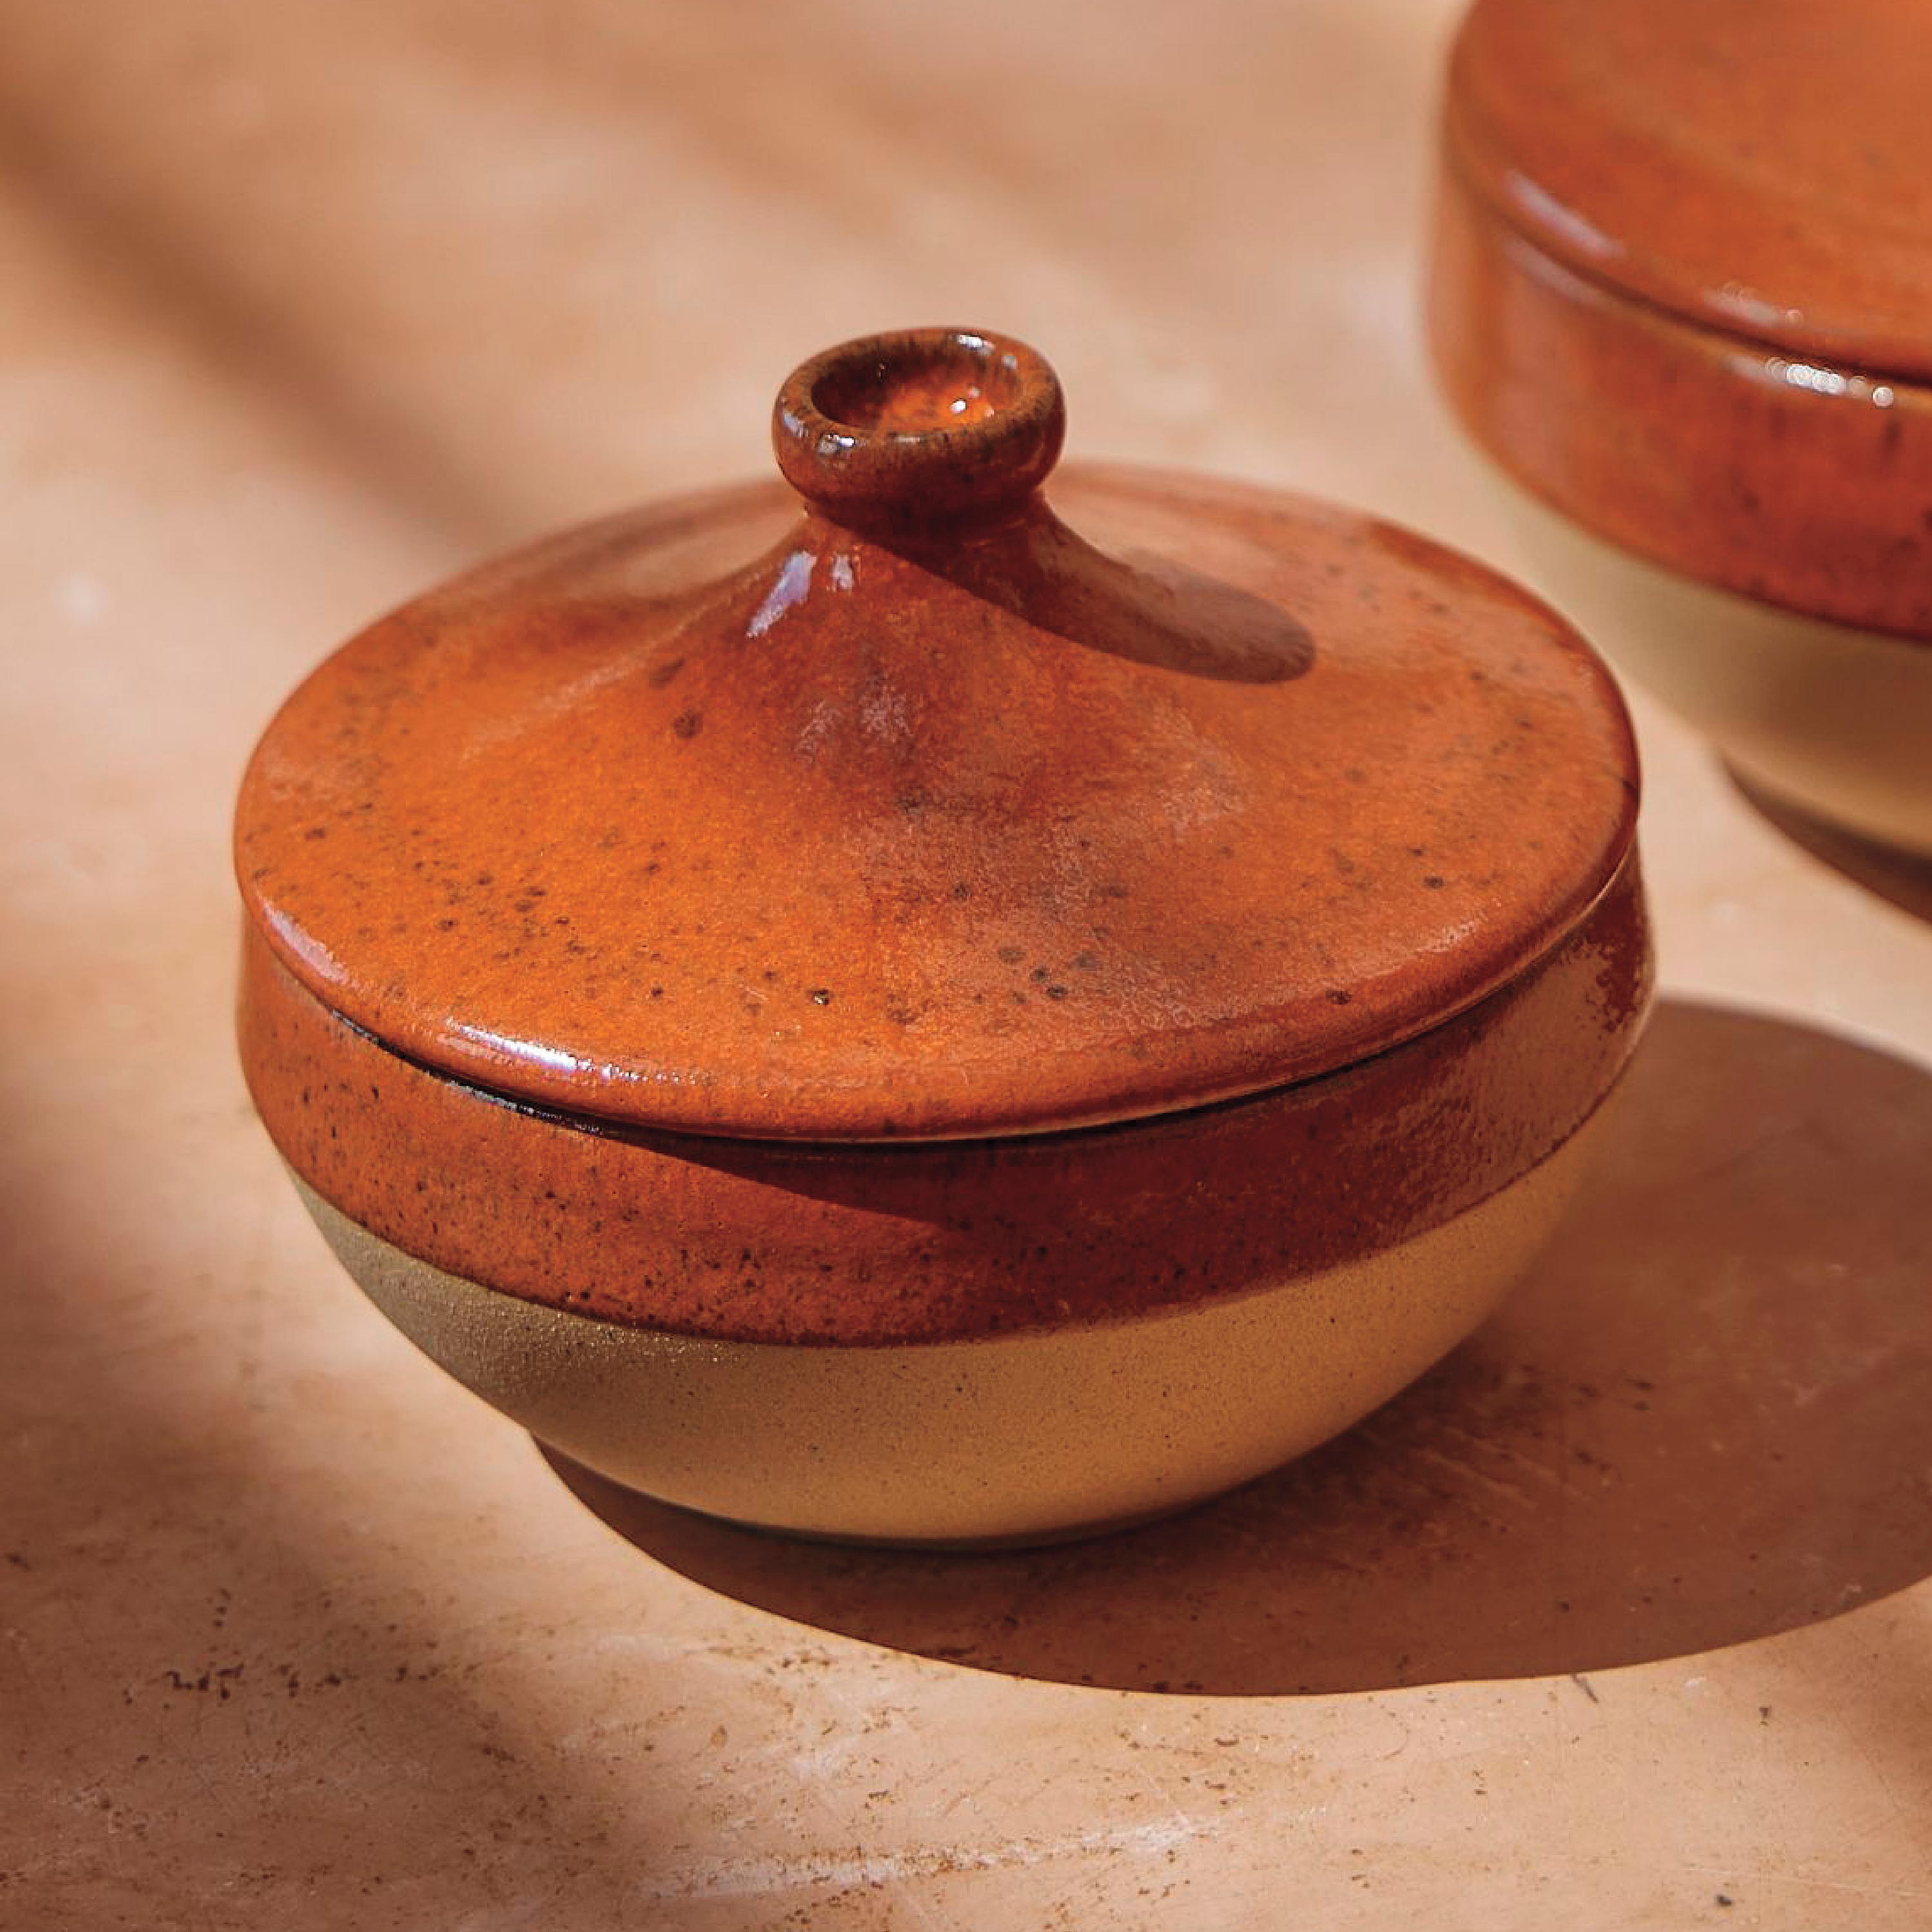 Marrakesh Small Covered Casserole Dish, Set of 2